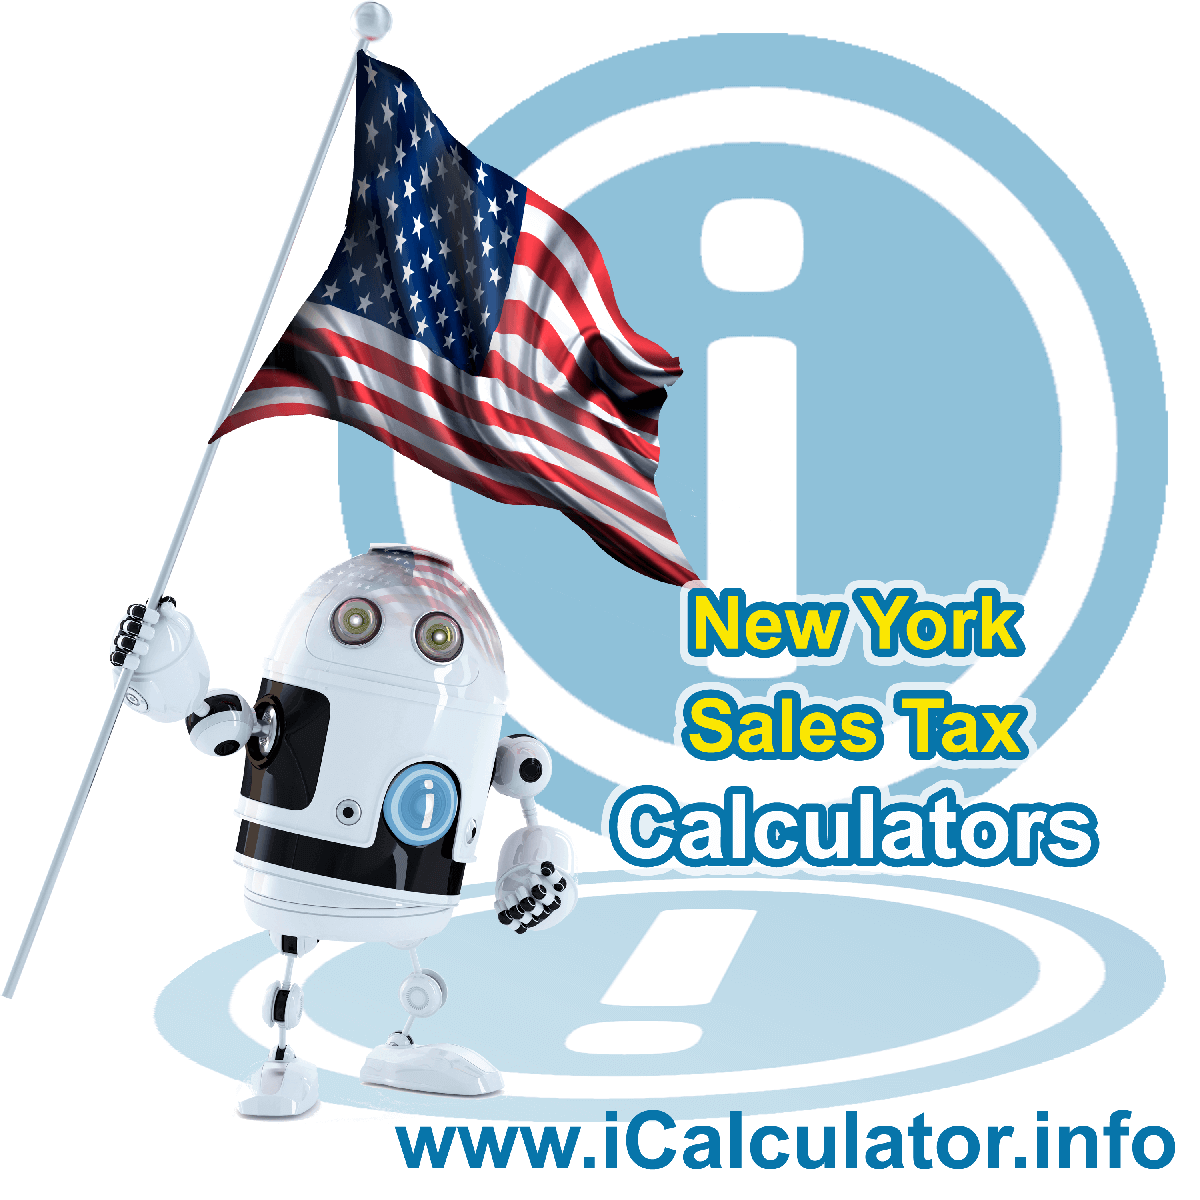 Saint Lawrence County Sales Rates: This image illustrates a calculator robot calculating Saint Lawrence County sales tax manually using the Saint Lawrence County Sales Tax Formula. You can use this information to calculate Saint Lawrence County Sales Tax manually or use the Saint Lawrence County Sales Tax Calculator to calculate sales tax online.